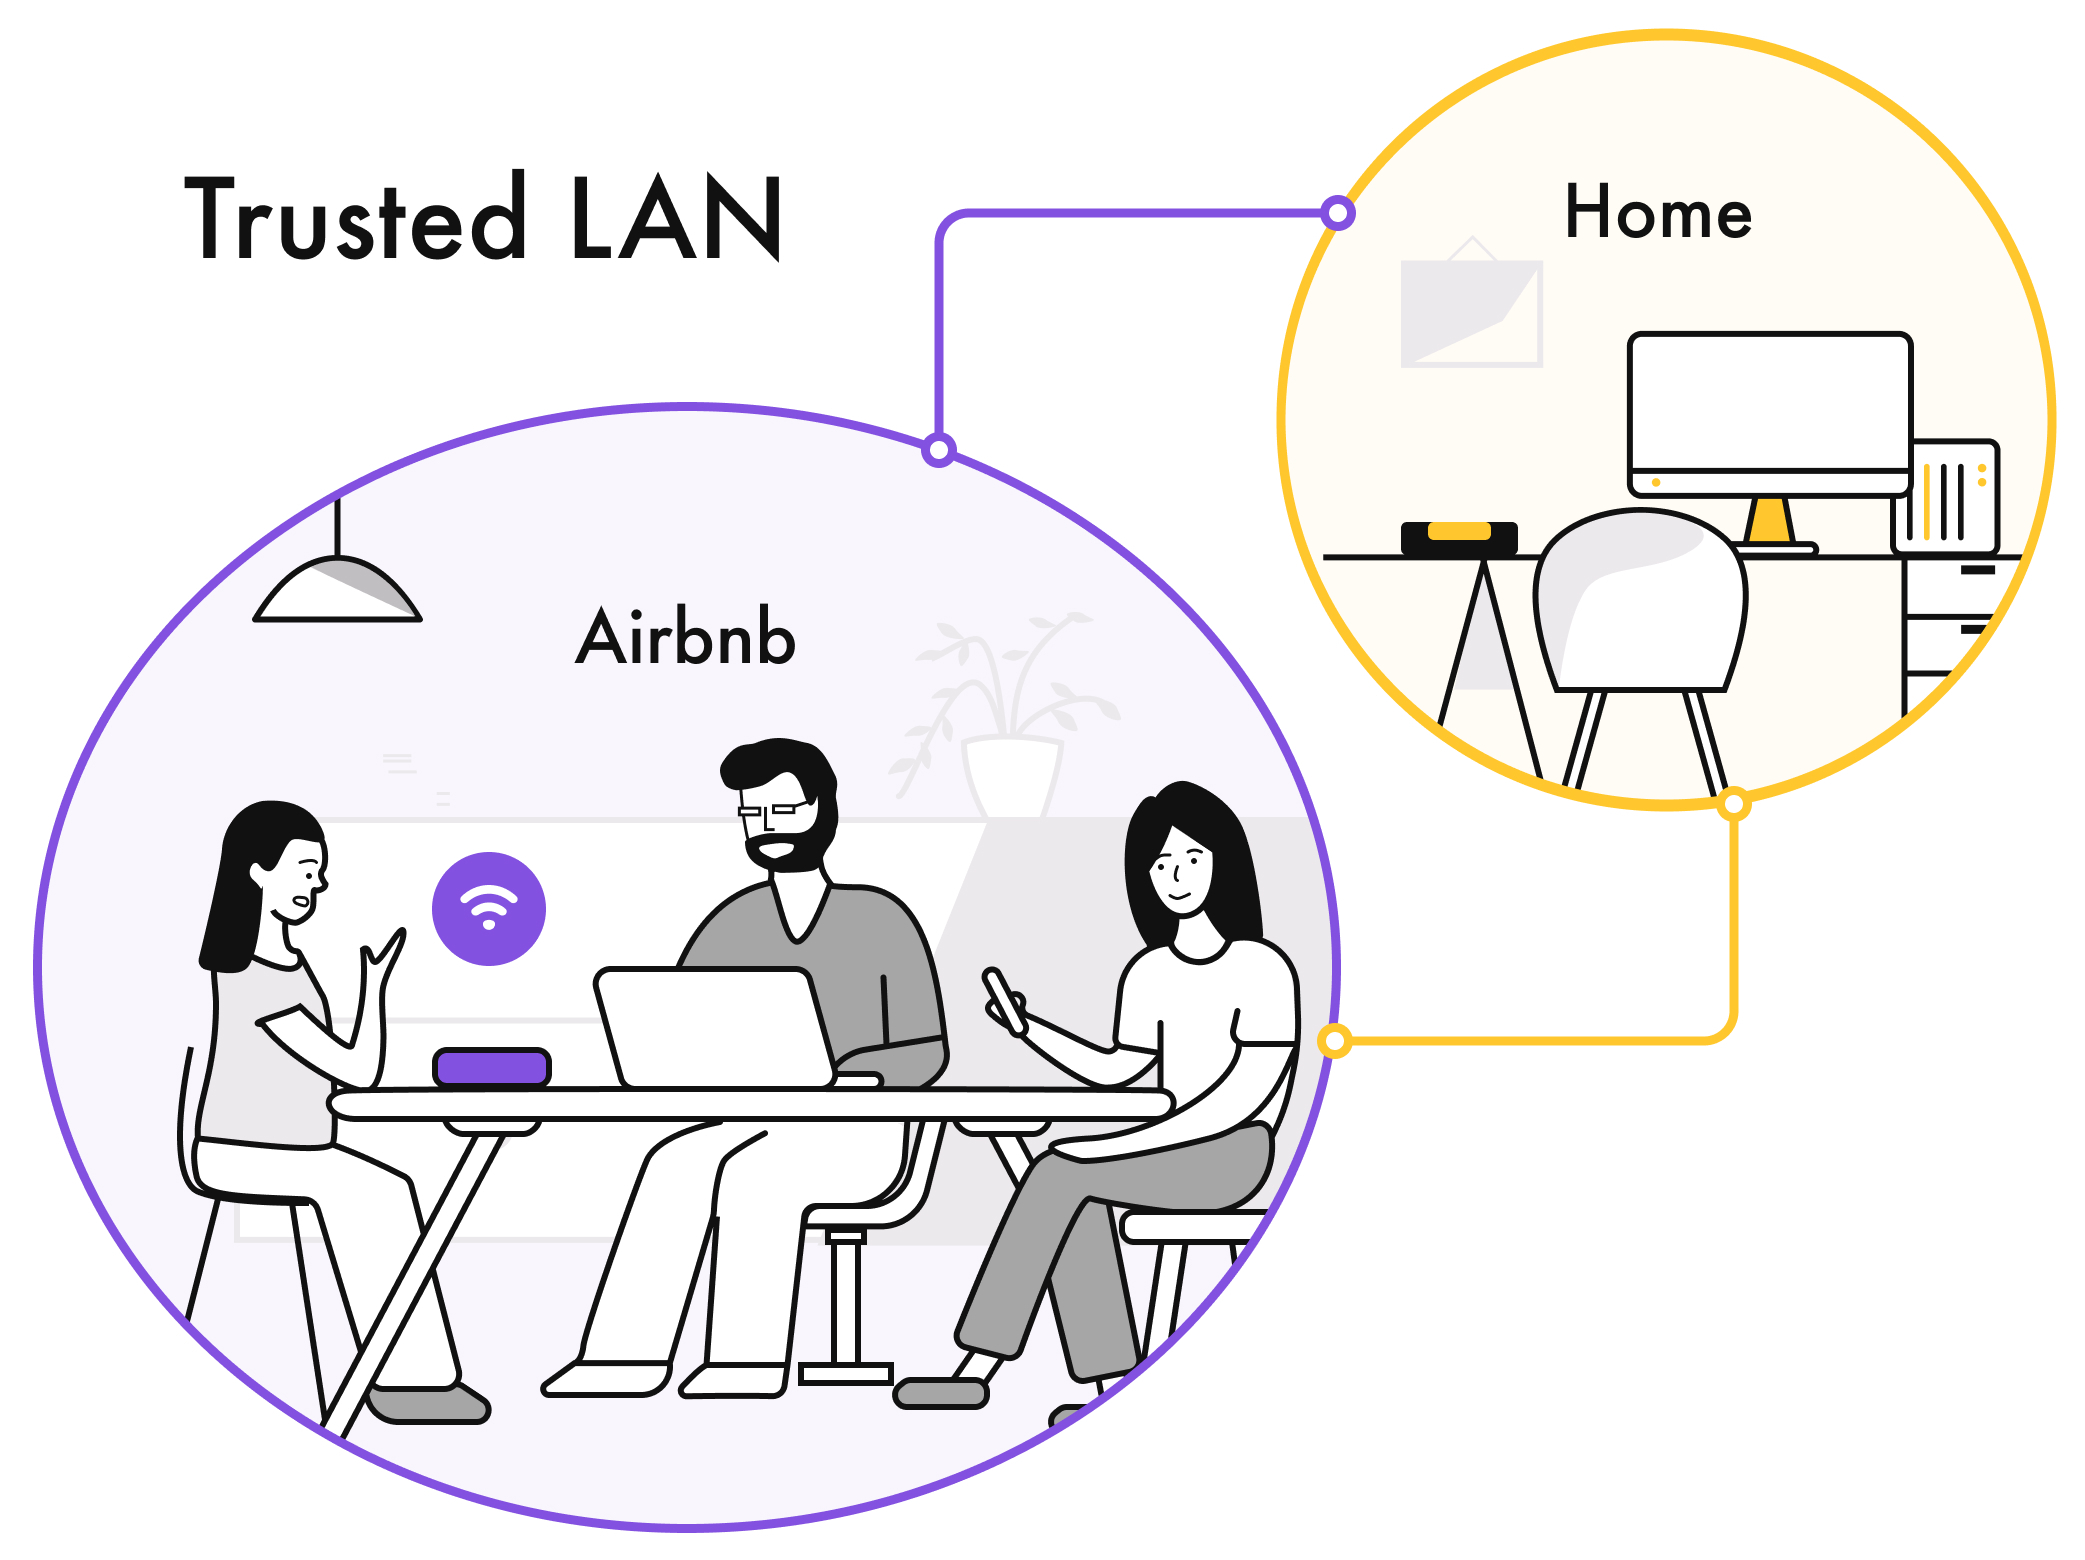 You need a trusted shared LAN when traveling, using public WiFi, or co-working space